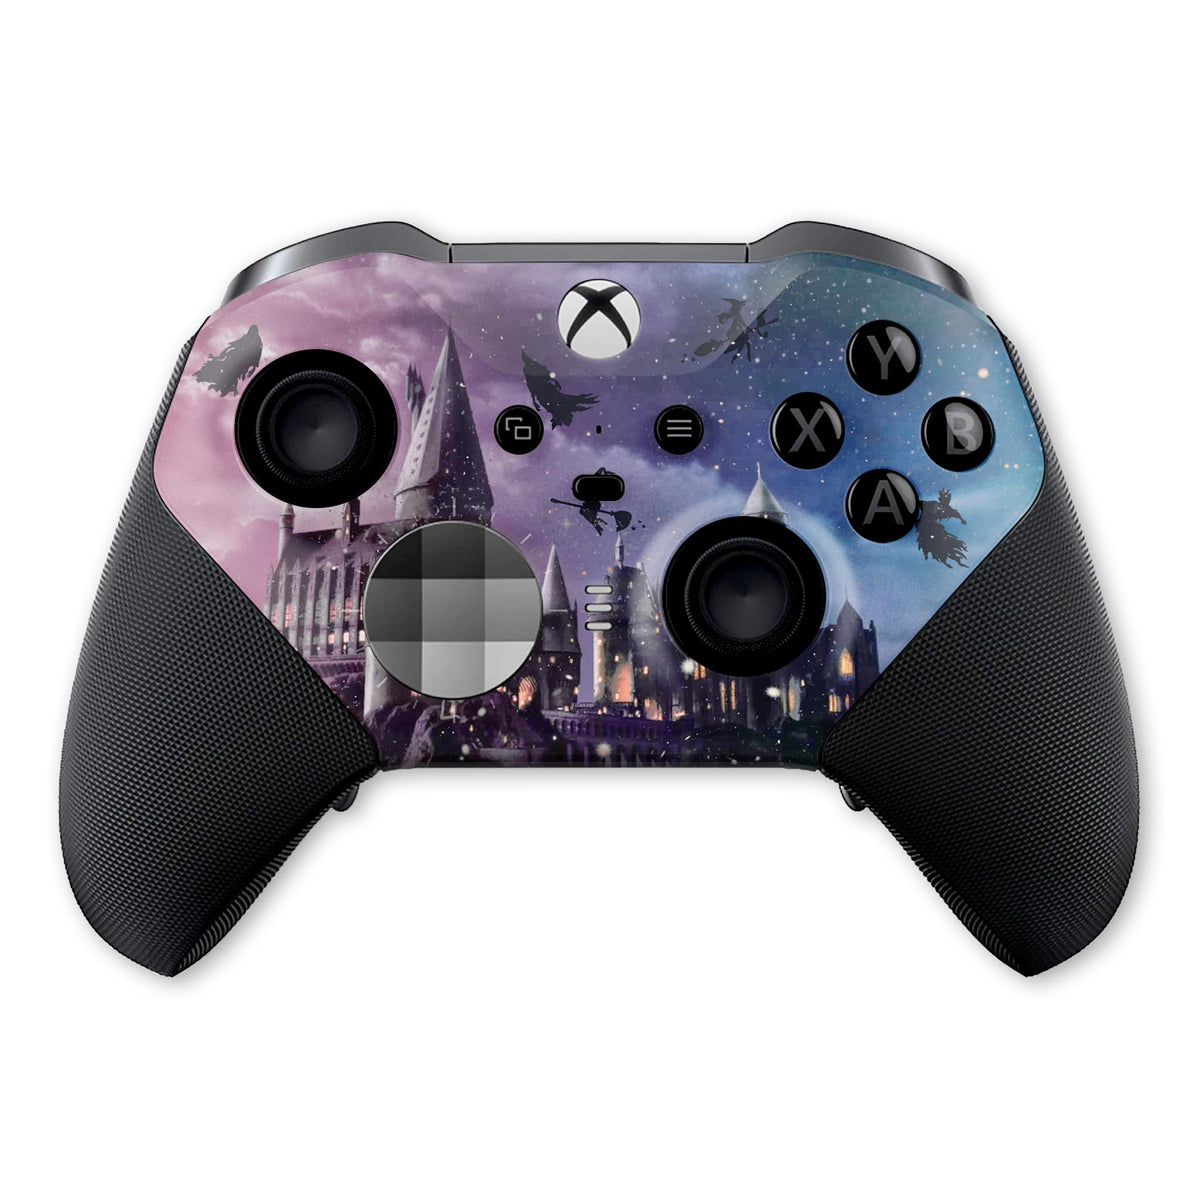 Custom Xbox One Controllers Add to Hogwarts Legacy Hype by Making Eager  Fans Drool - EssentiallySports